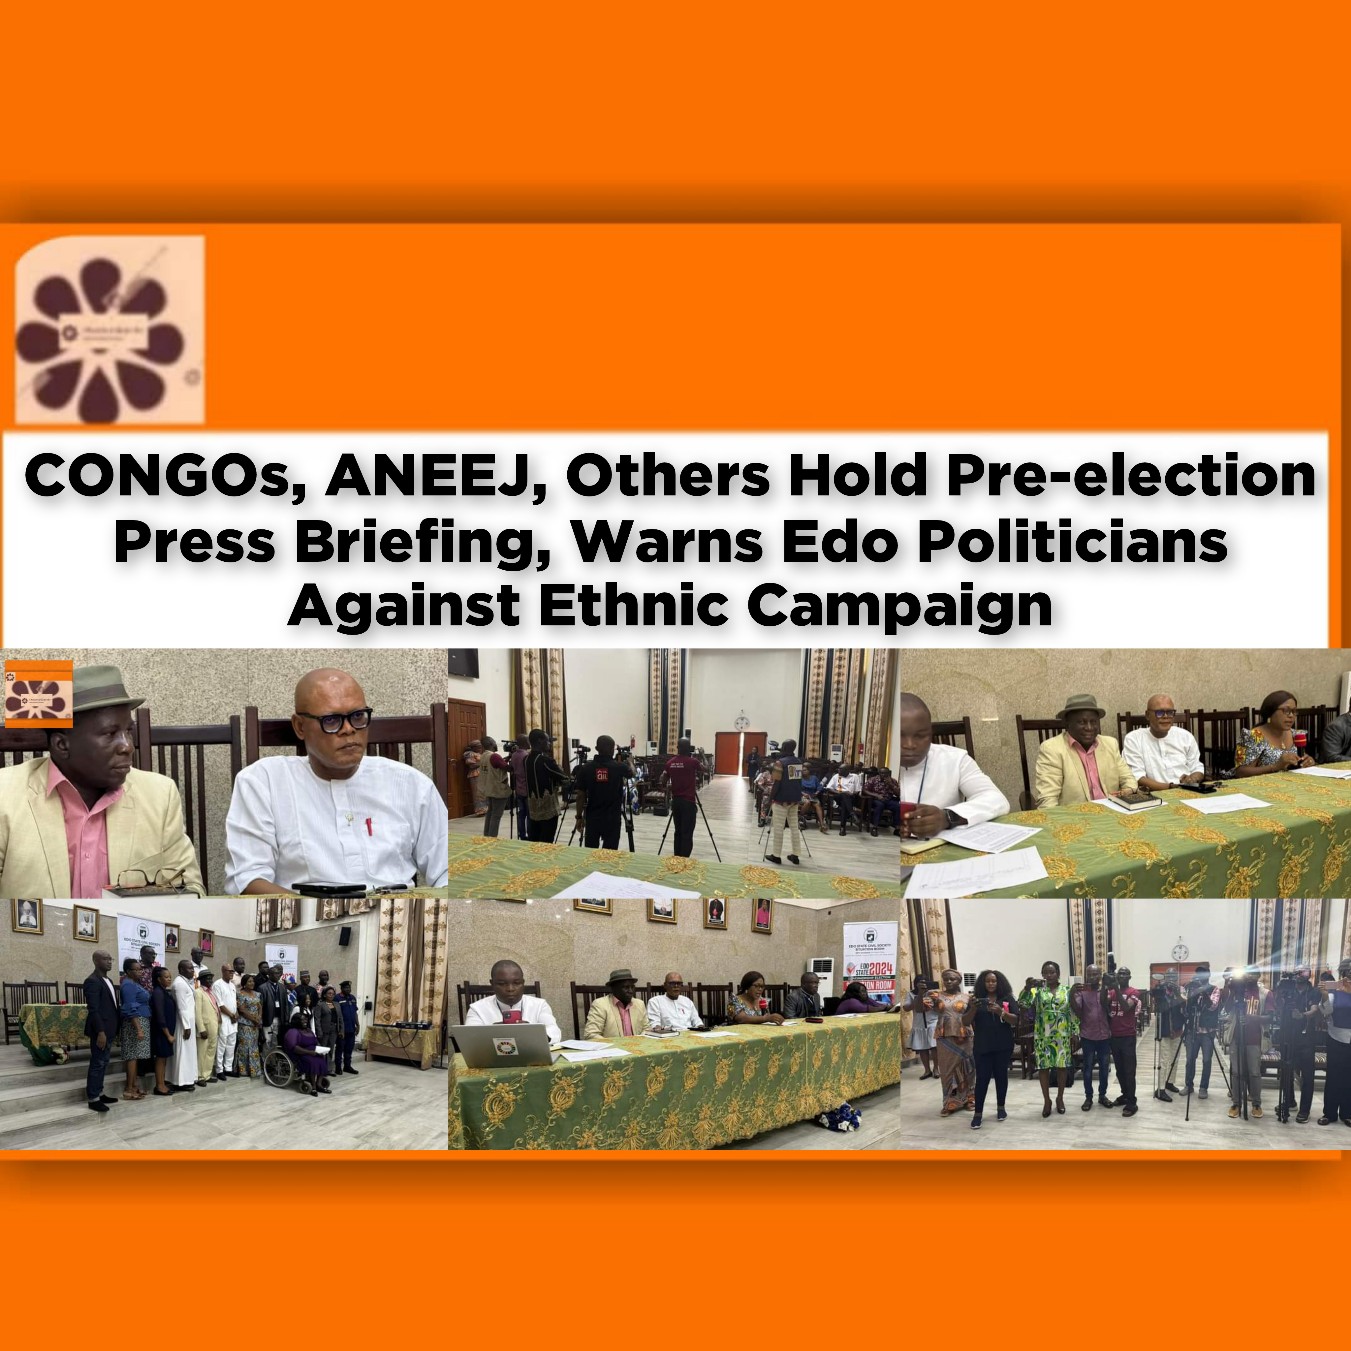 CONGOs, ANEEJ, Others Hold Pre-election Press Briefing, Warns Edo Politicians Against Ethnic Campaign ~ OsazuwaAkonedo #army